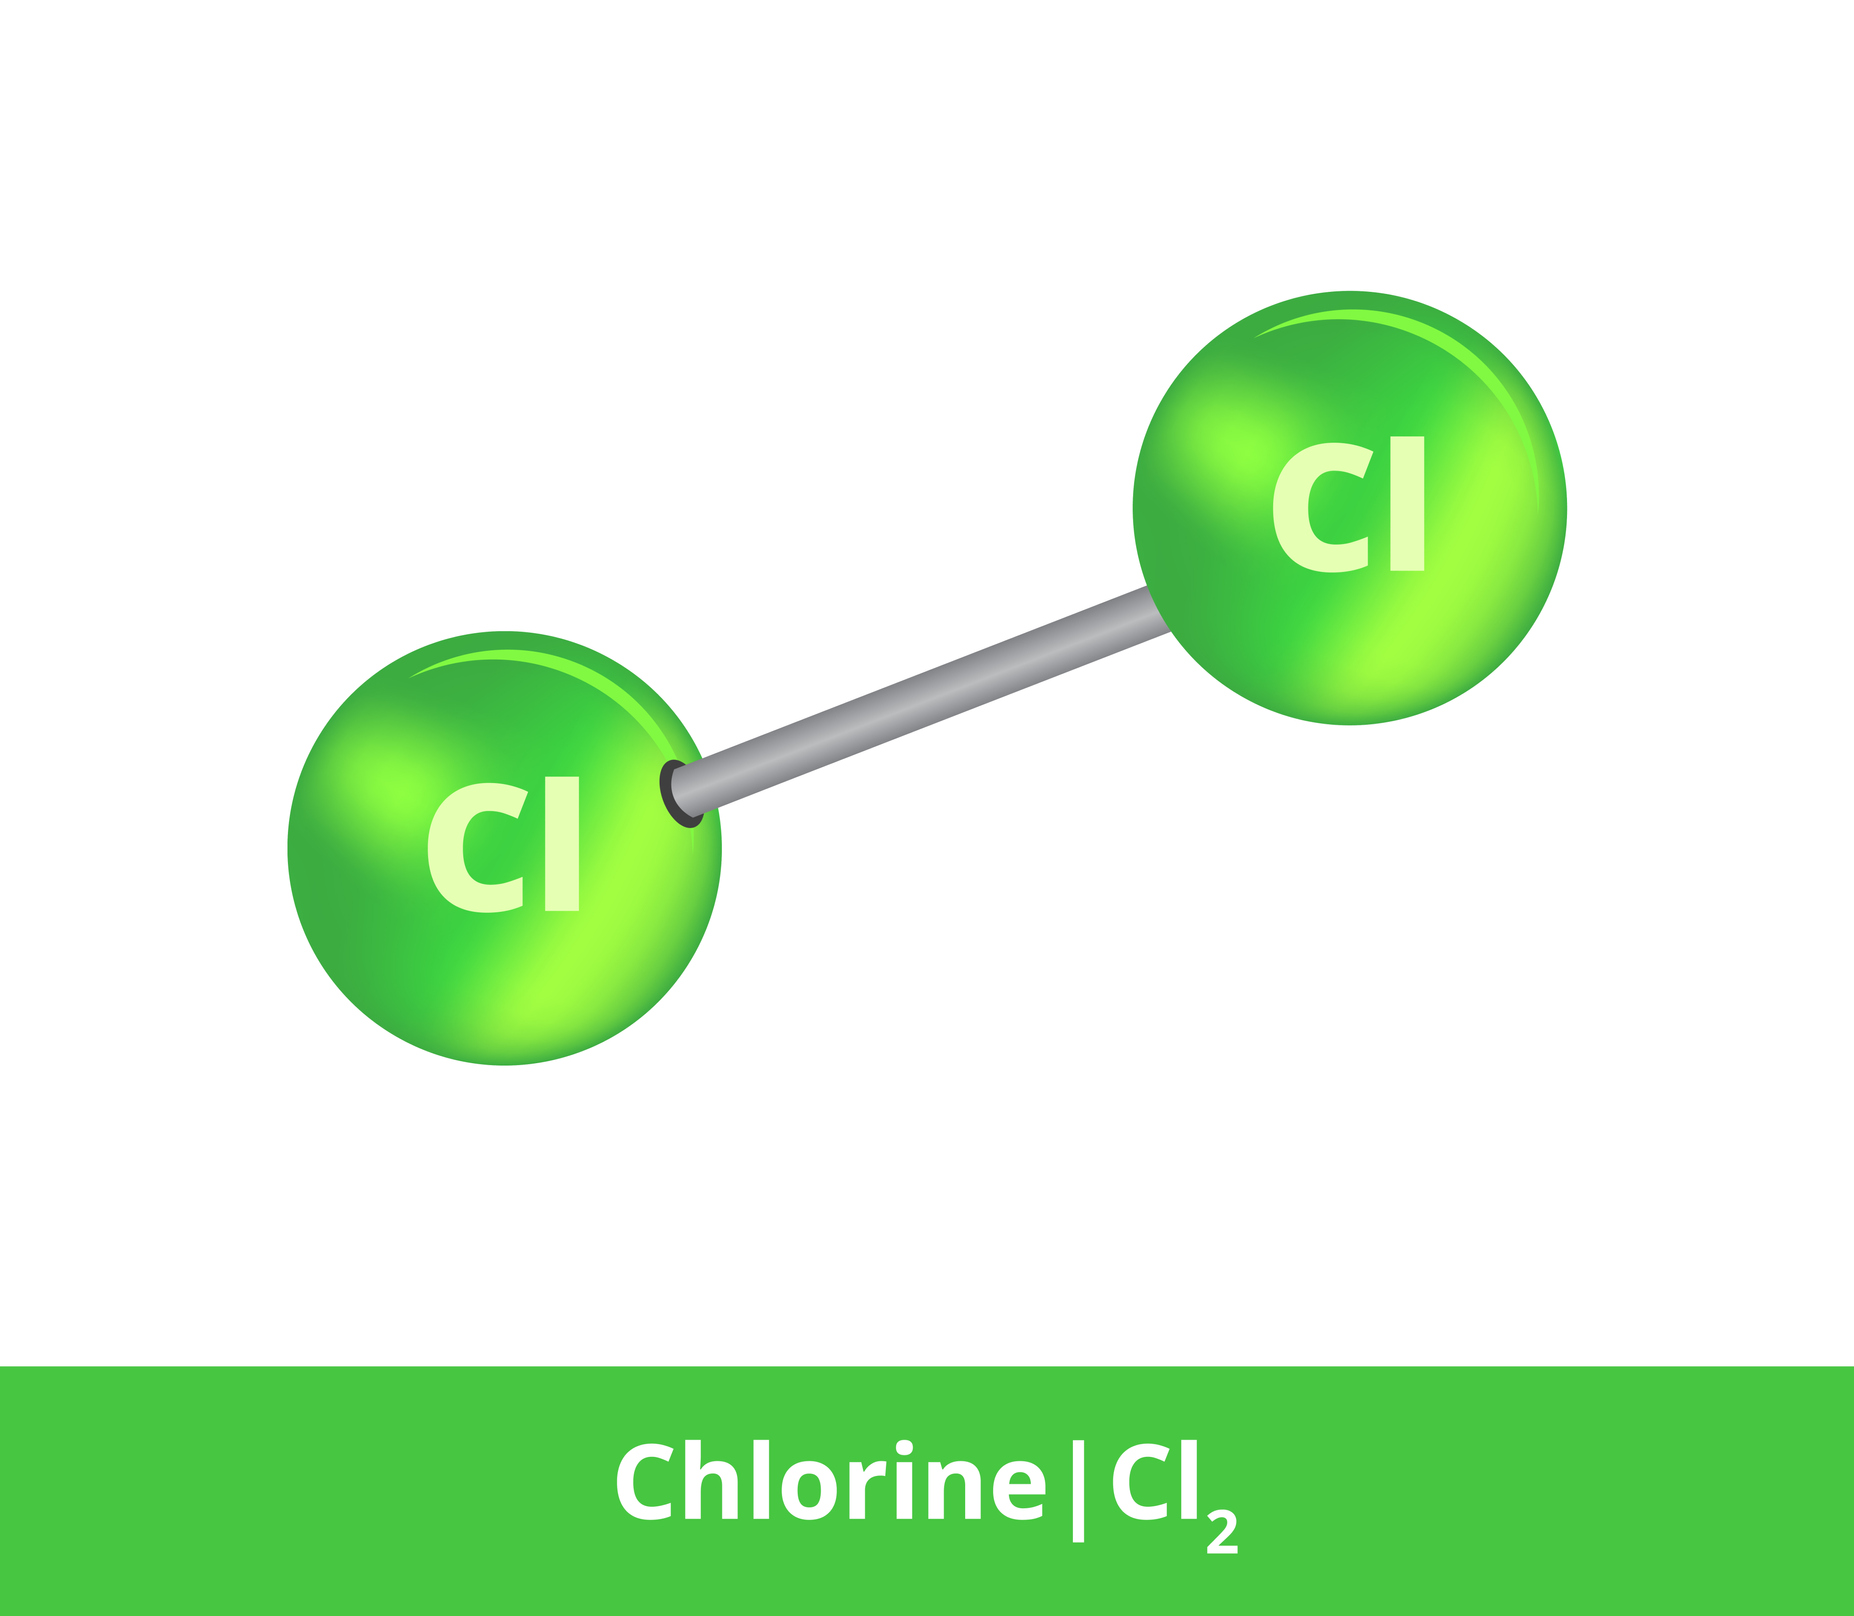 Because of its high reactivity, chlorine always occurs in a bound form, for example as a diatomic molecule of Cl2.